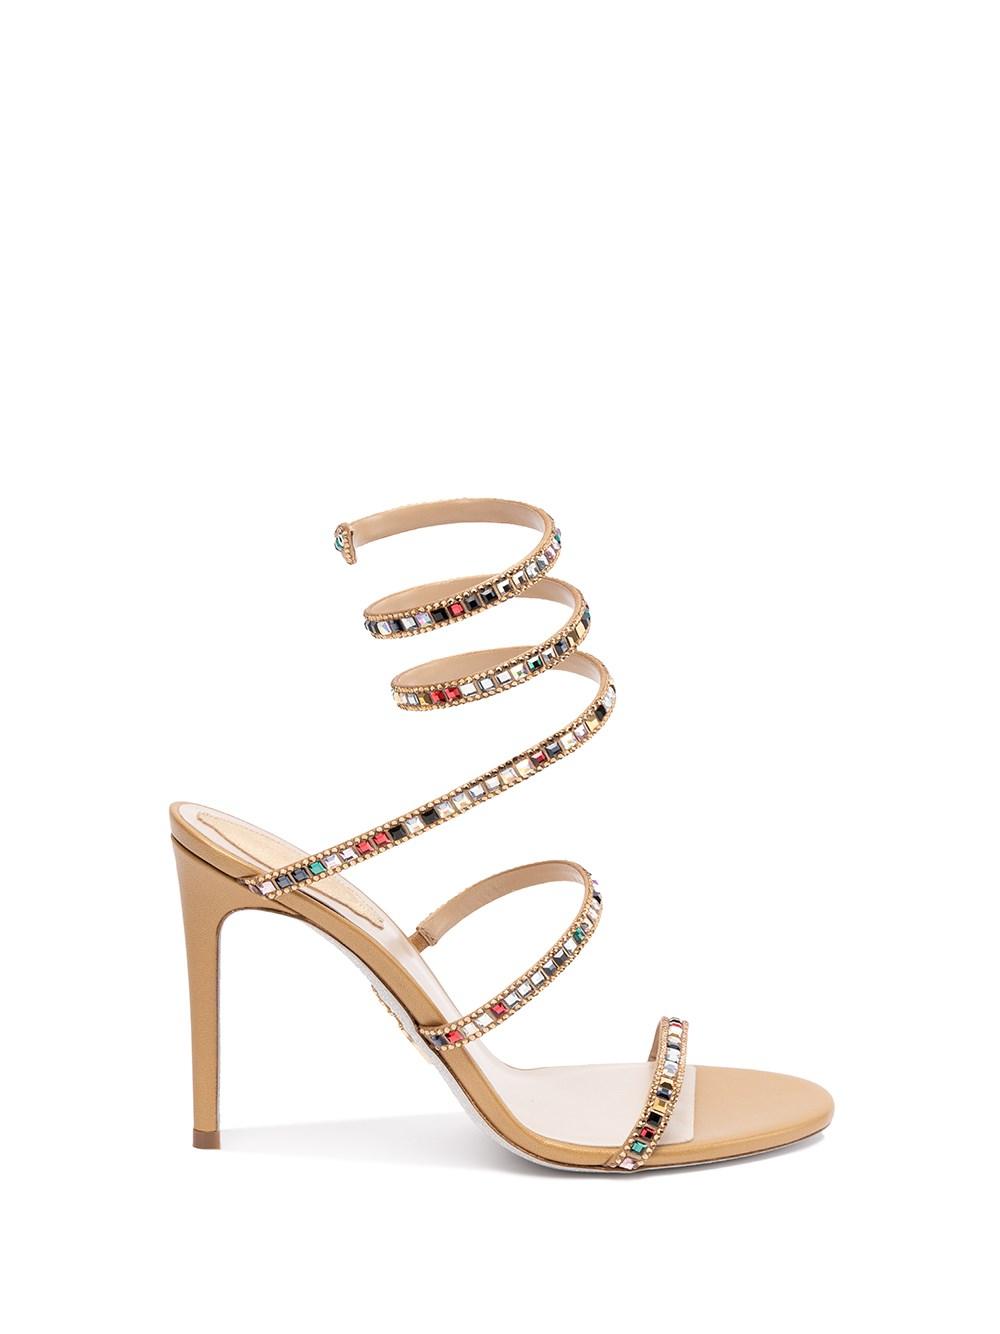 Rene Caovilla Cleo Sandal With Multicolor Crystals in Natural | Lyst